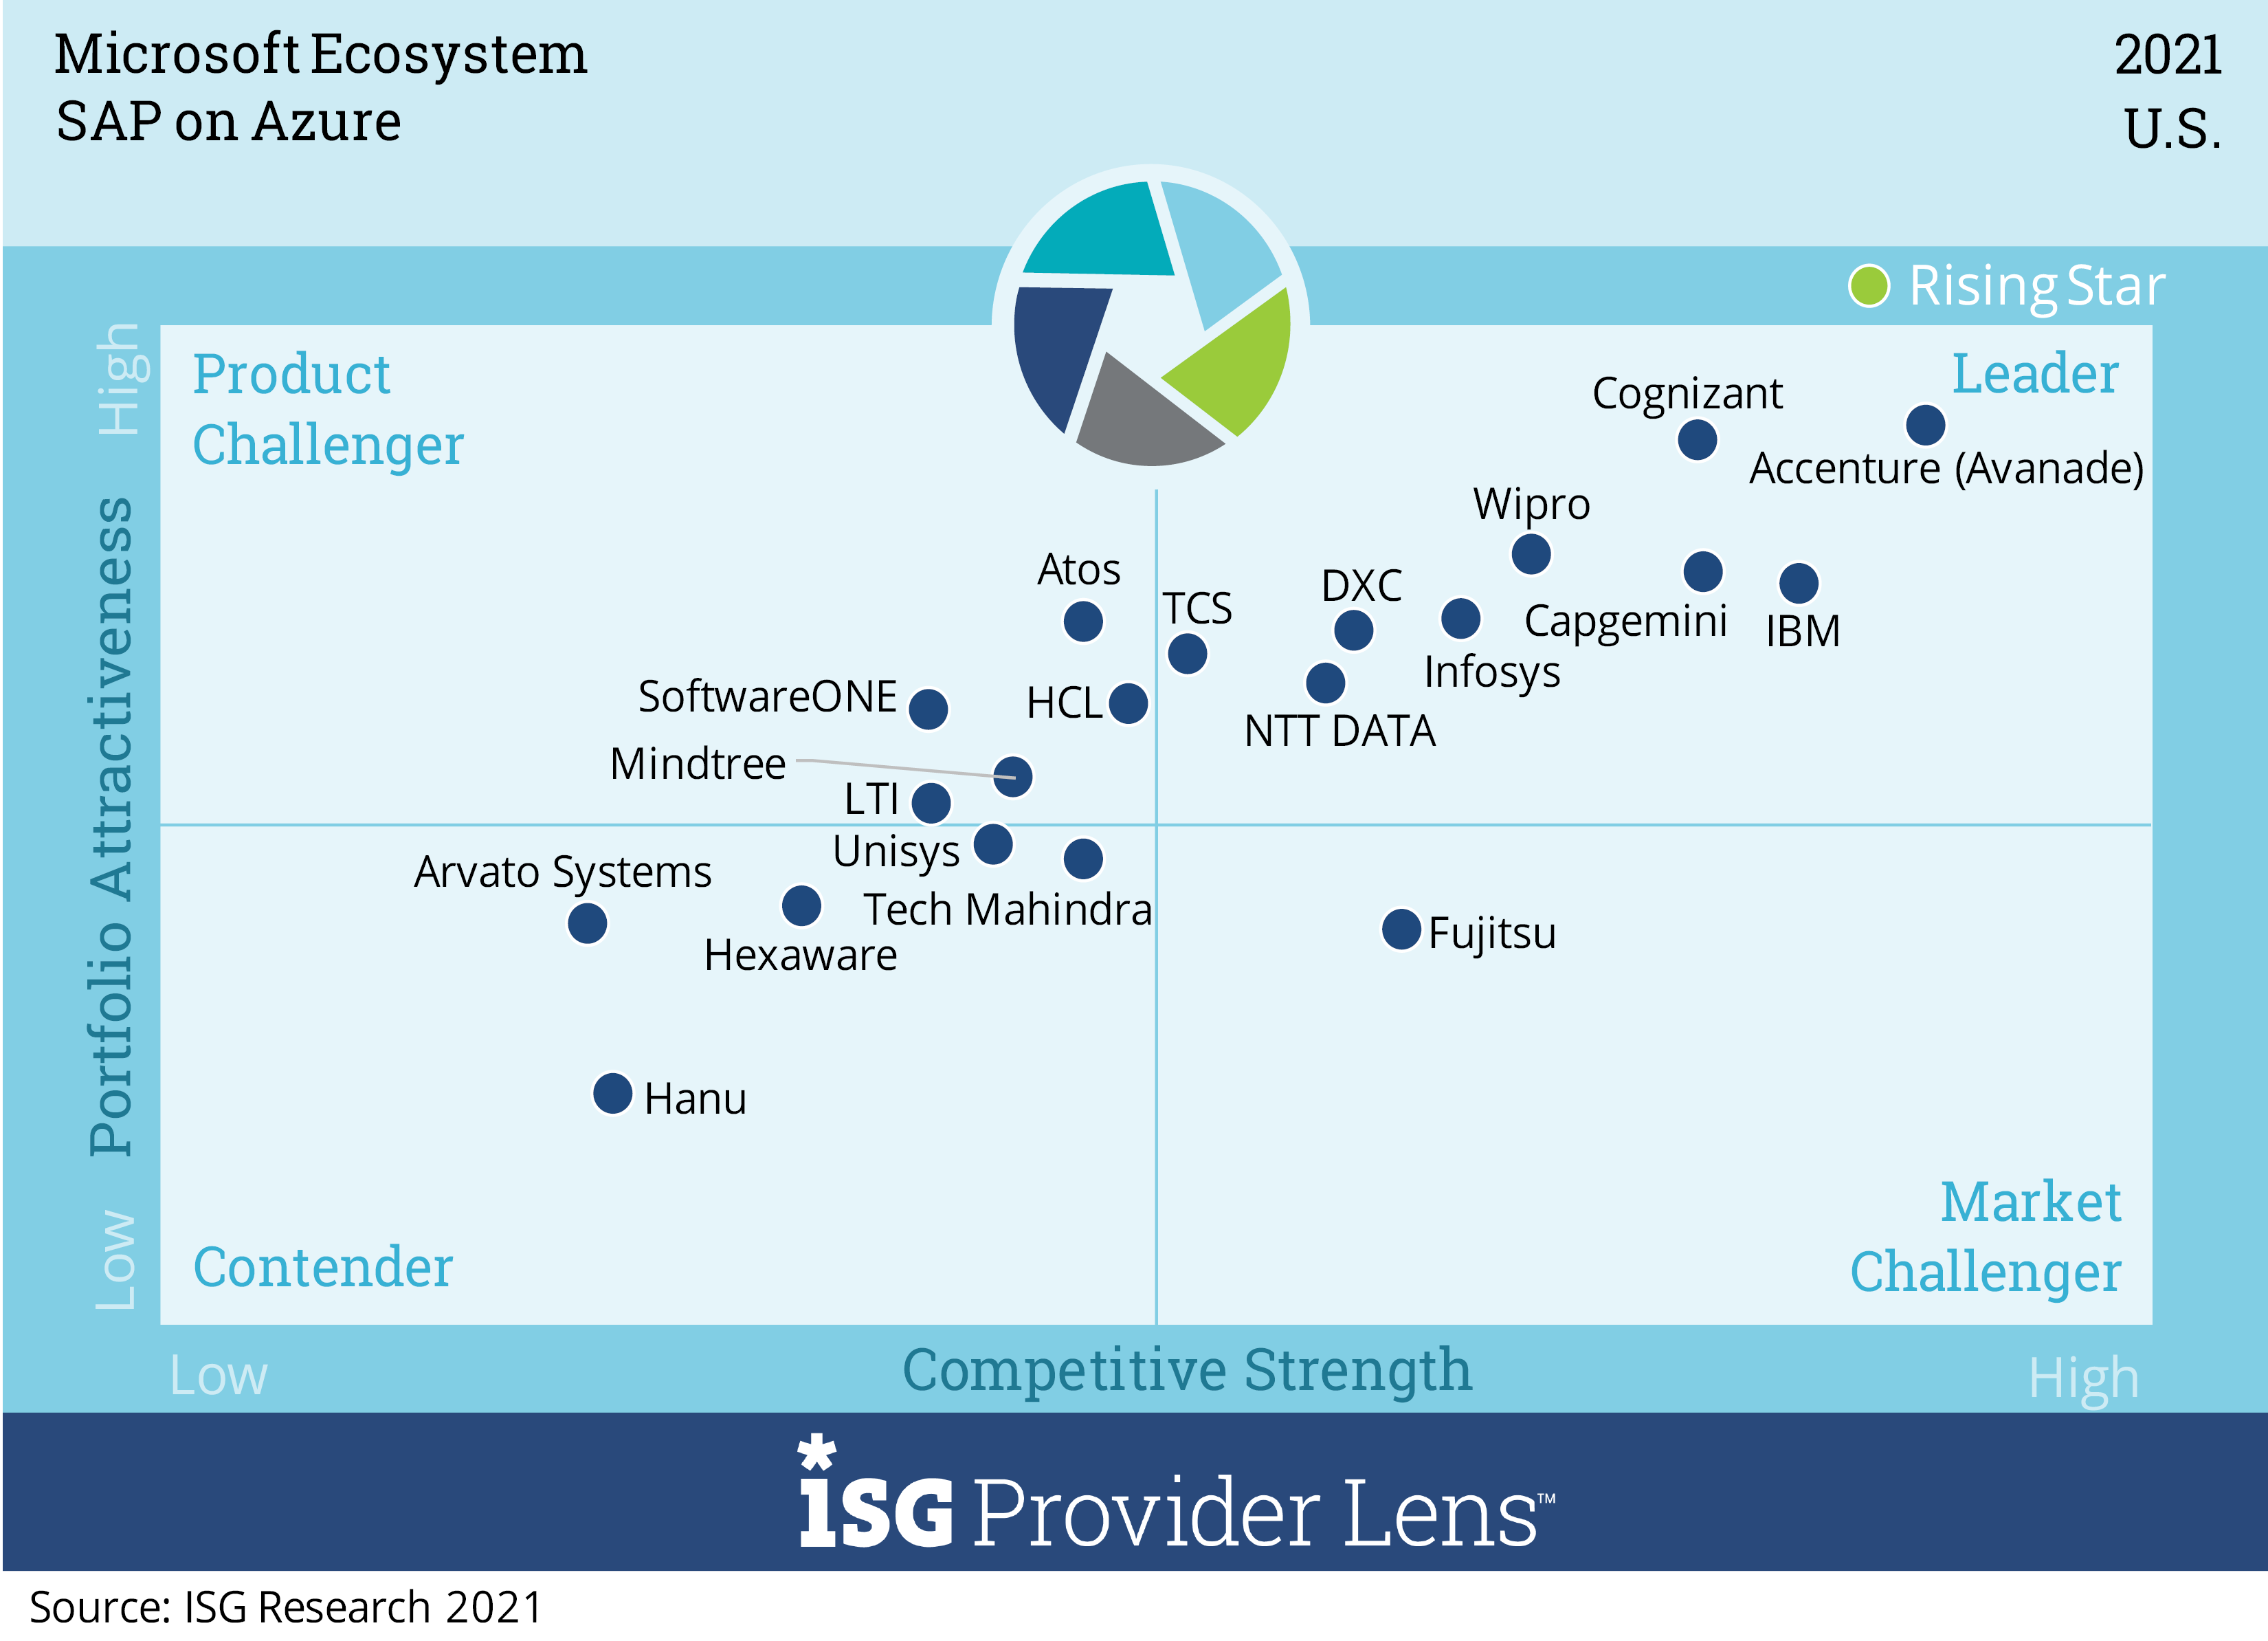 Wipro positioned as a “Leader” for SAP on Azure in ISG Provider LensTM, Microsoft Ecosystem, U.S. 2021